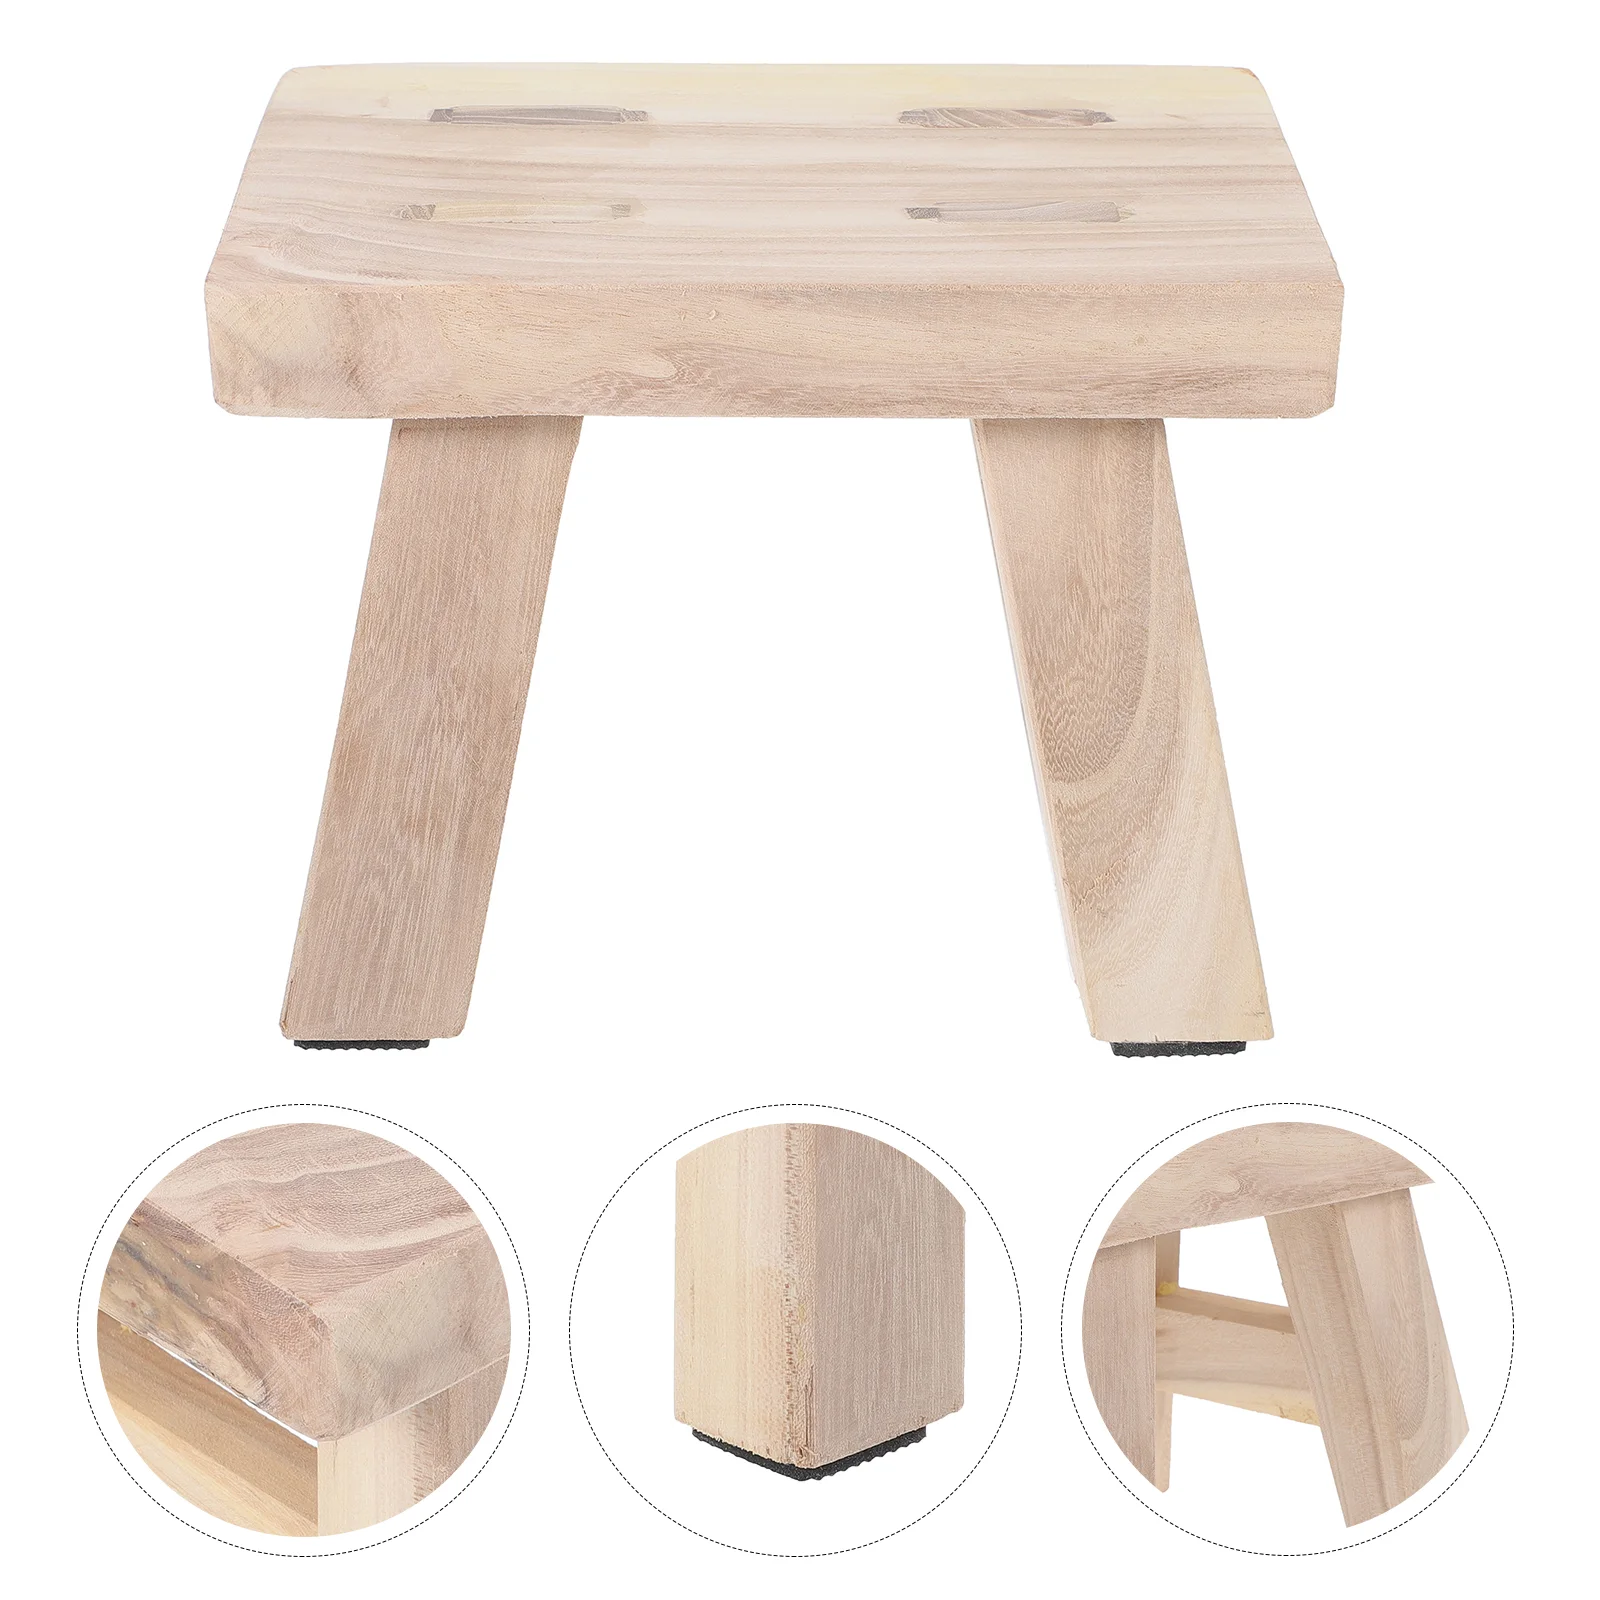 

Solid Wood Bench Small Stool Stools Sit on Footstool Kids for Sitting Wooden Mini Step